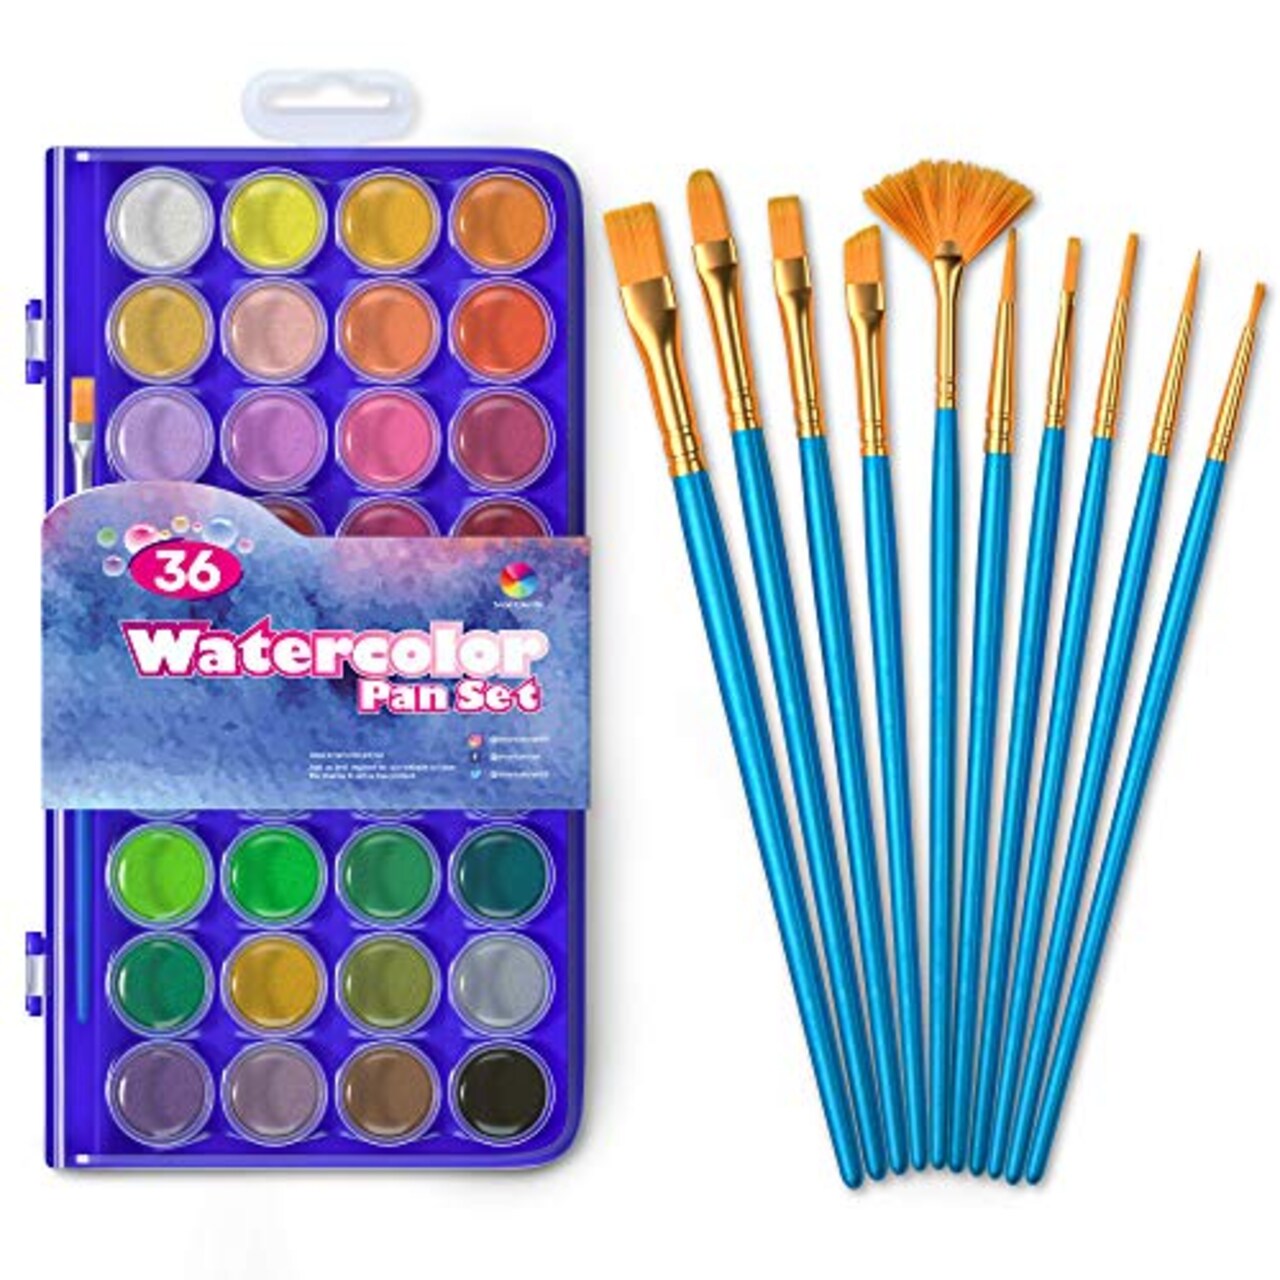 46 Pack Watercolor Paint Set, 36 Colors Watercolor Pan with 10 Brushes Kit,  Easy to Blend Colors, Perfect for Kids, Adults and Beginner Artists by  Smart Color Art